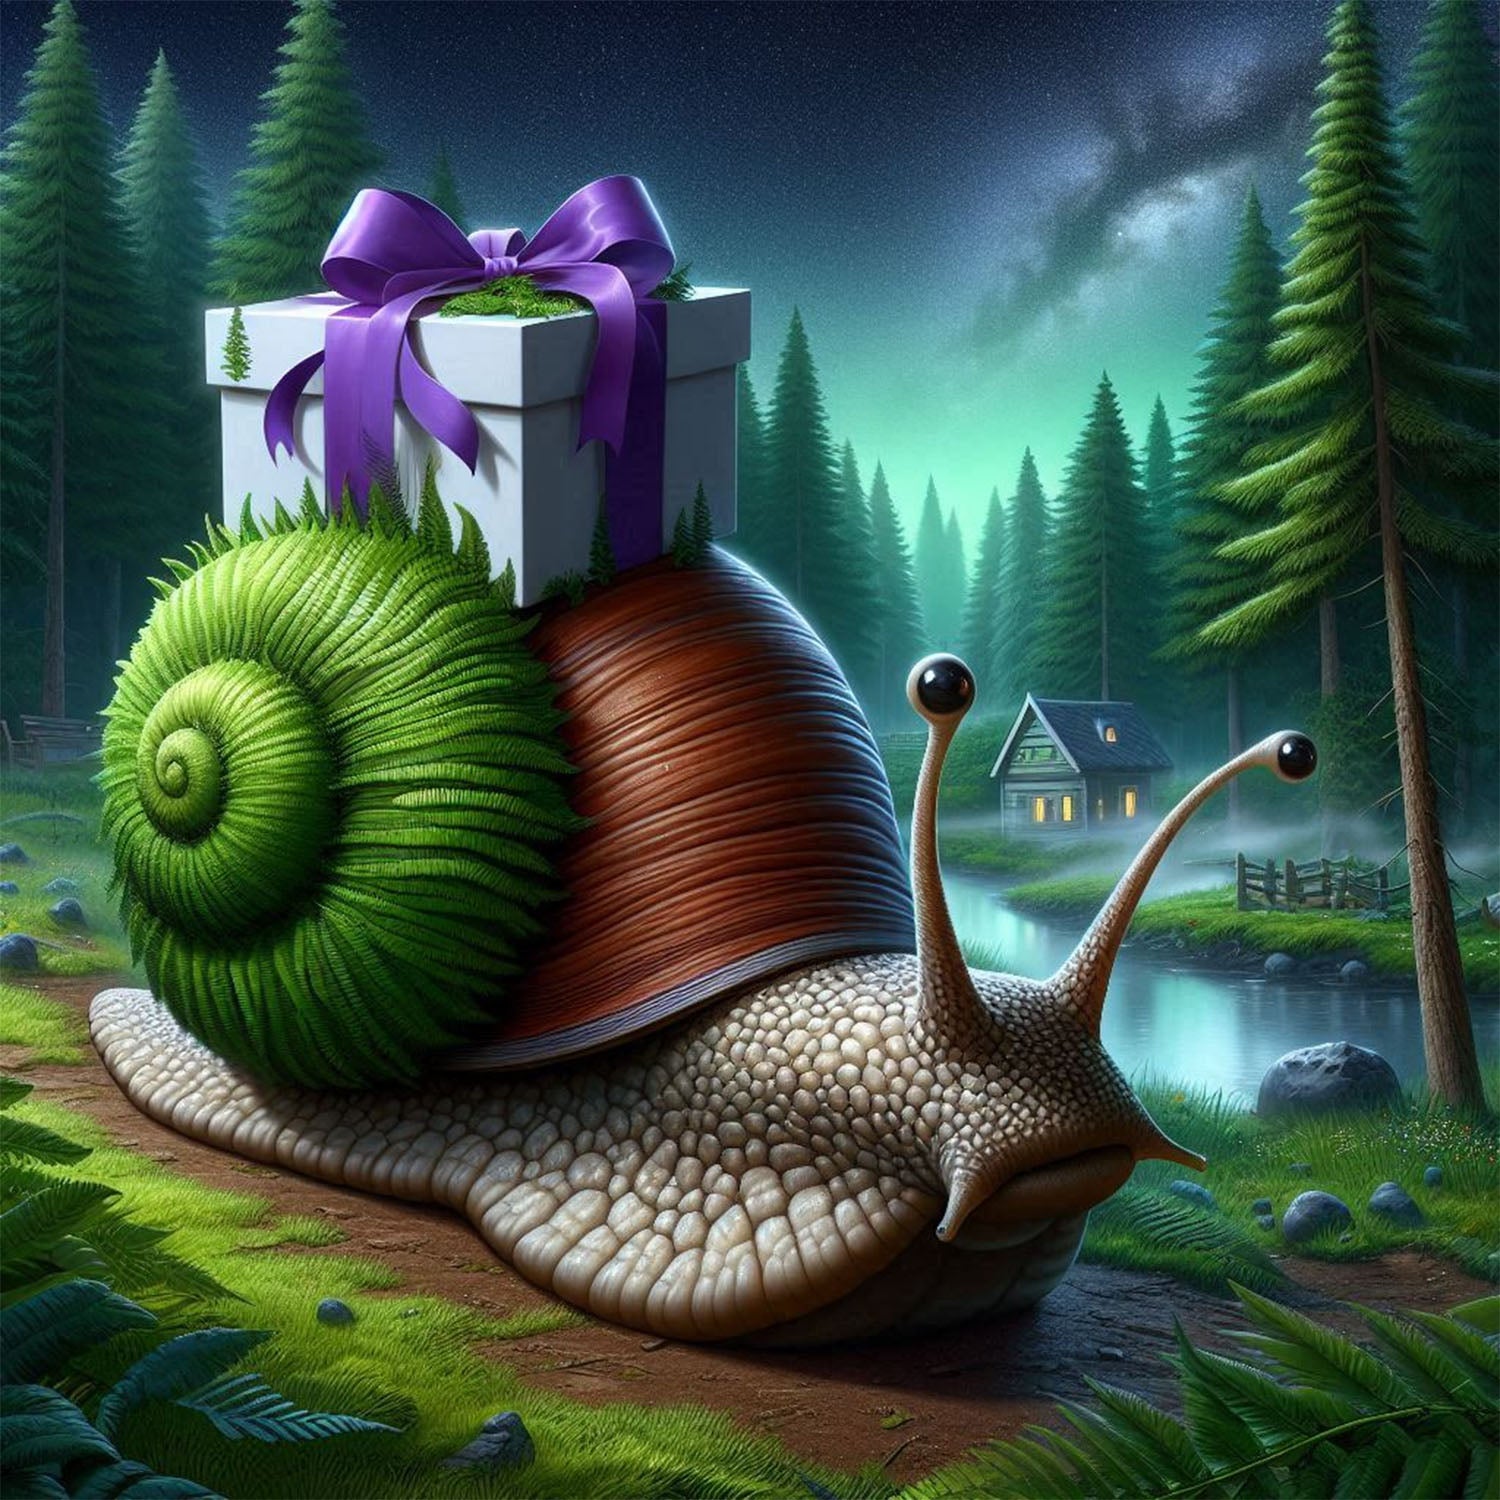 Snail's Enchantment Package